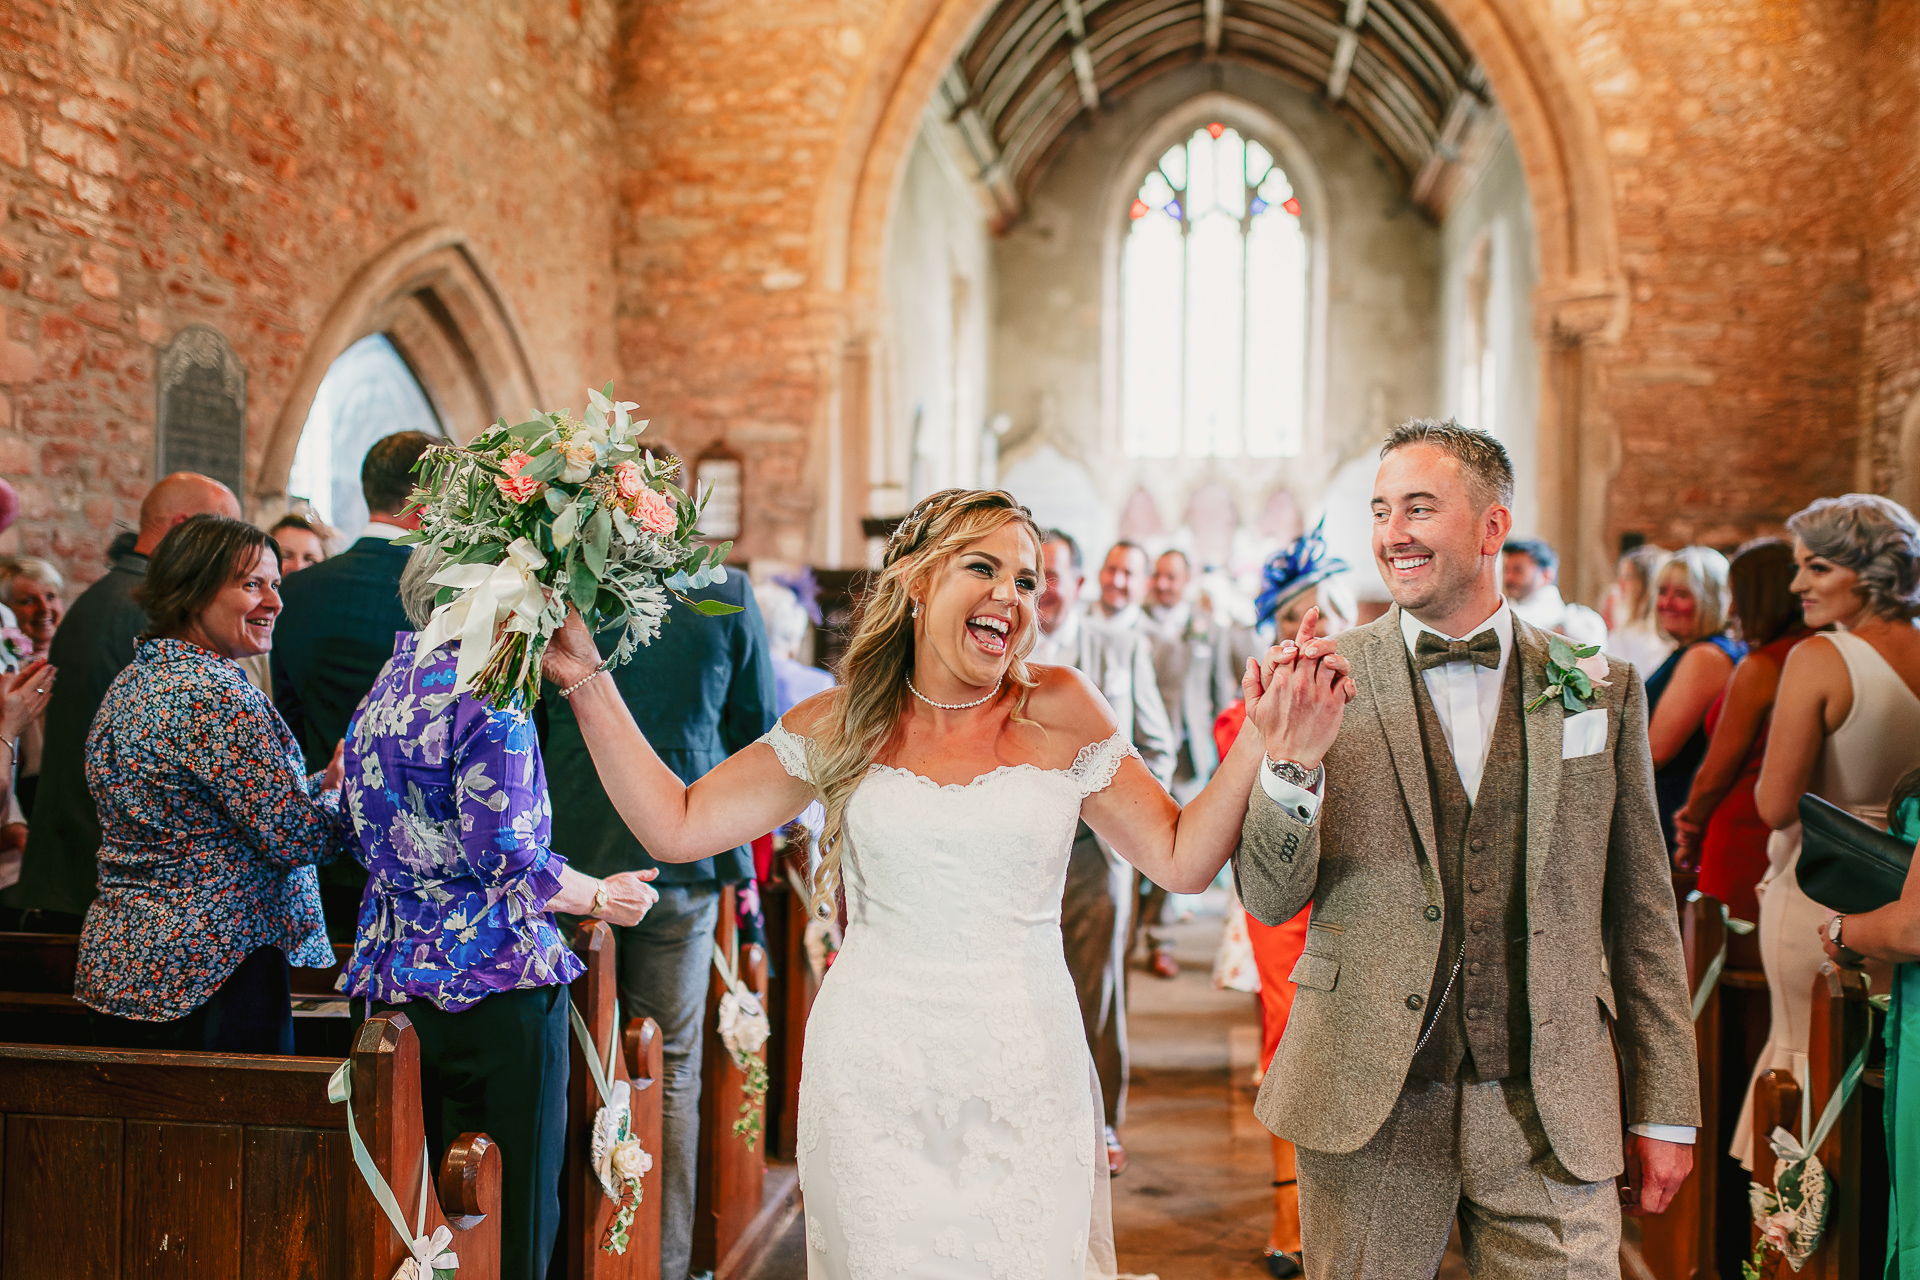 A bride celebrate by punching the air with her flowers as she walks down the aisle of a church after just getting married in a church near Bristol